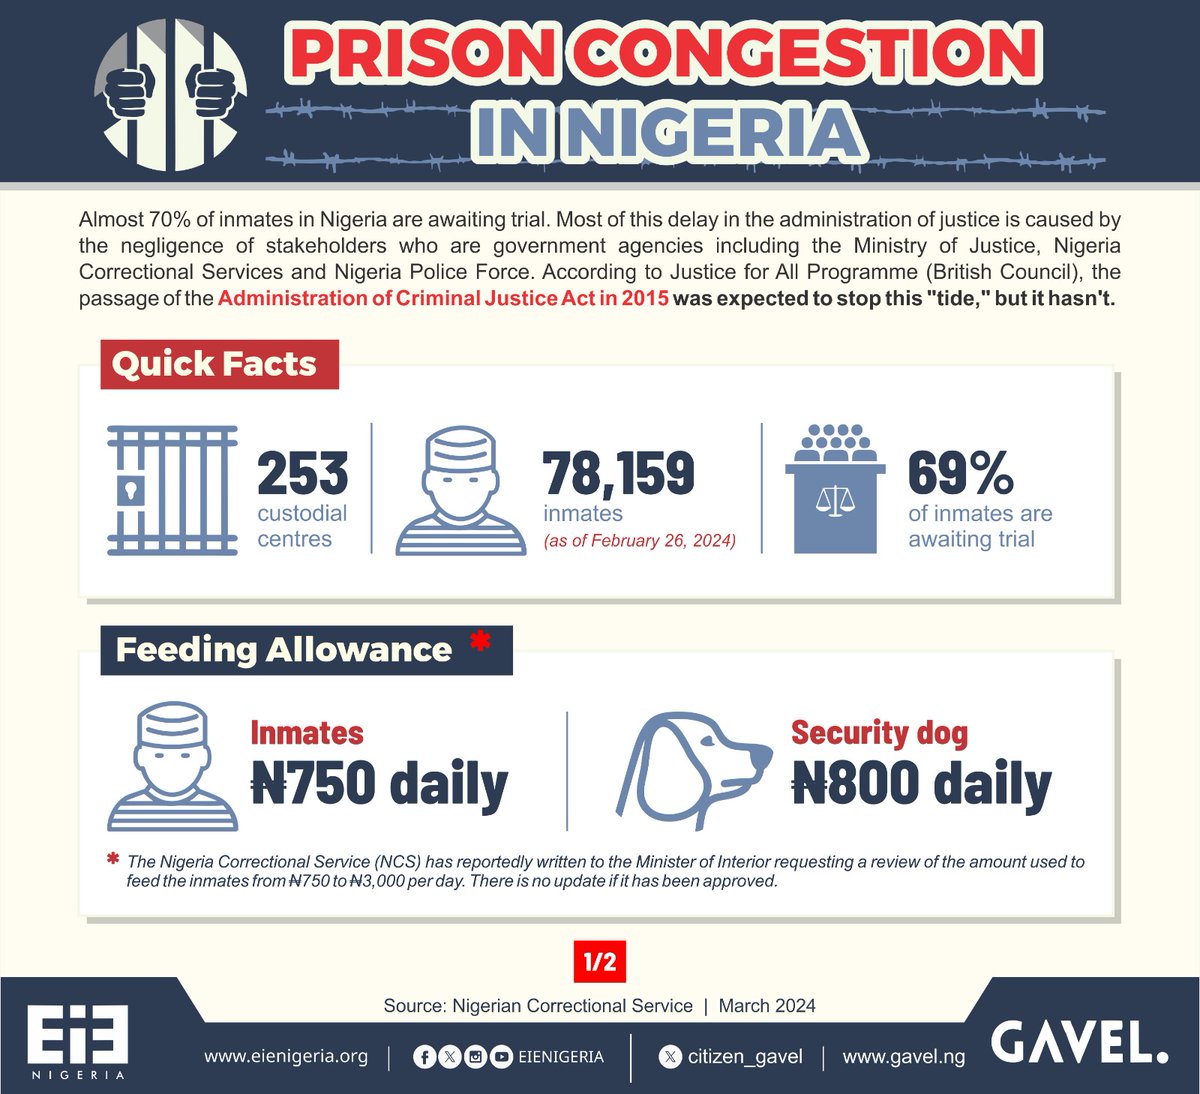 Overcrowding, underfunding, and inhumane conditions create a powder keg situation across Nigeria's prisons. With 78,159 inmates crammed into only 253 facilities, 69% awaiting trial indefinitely, it's a crisis waiting to explode.